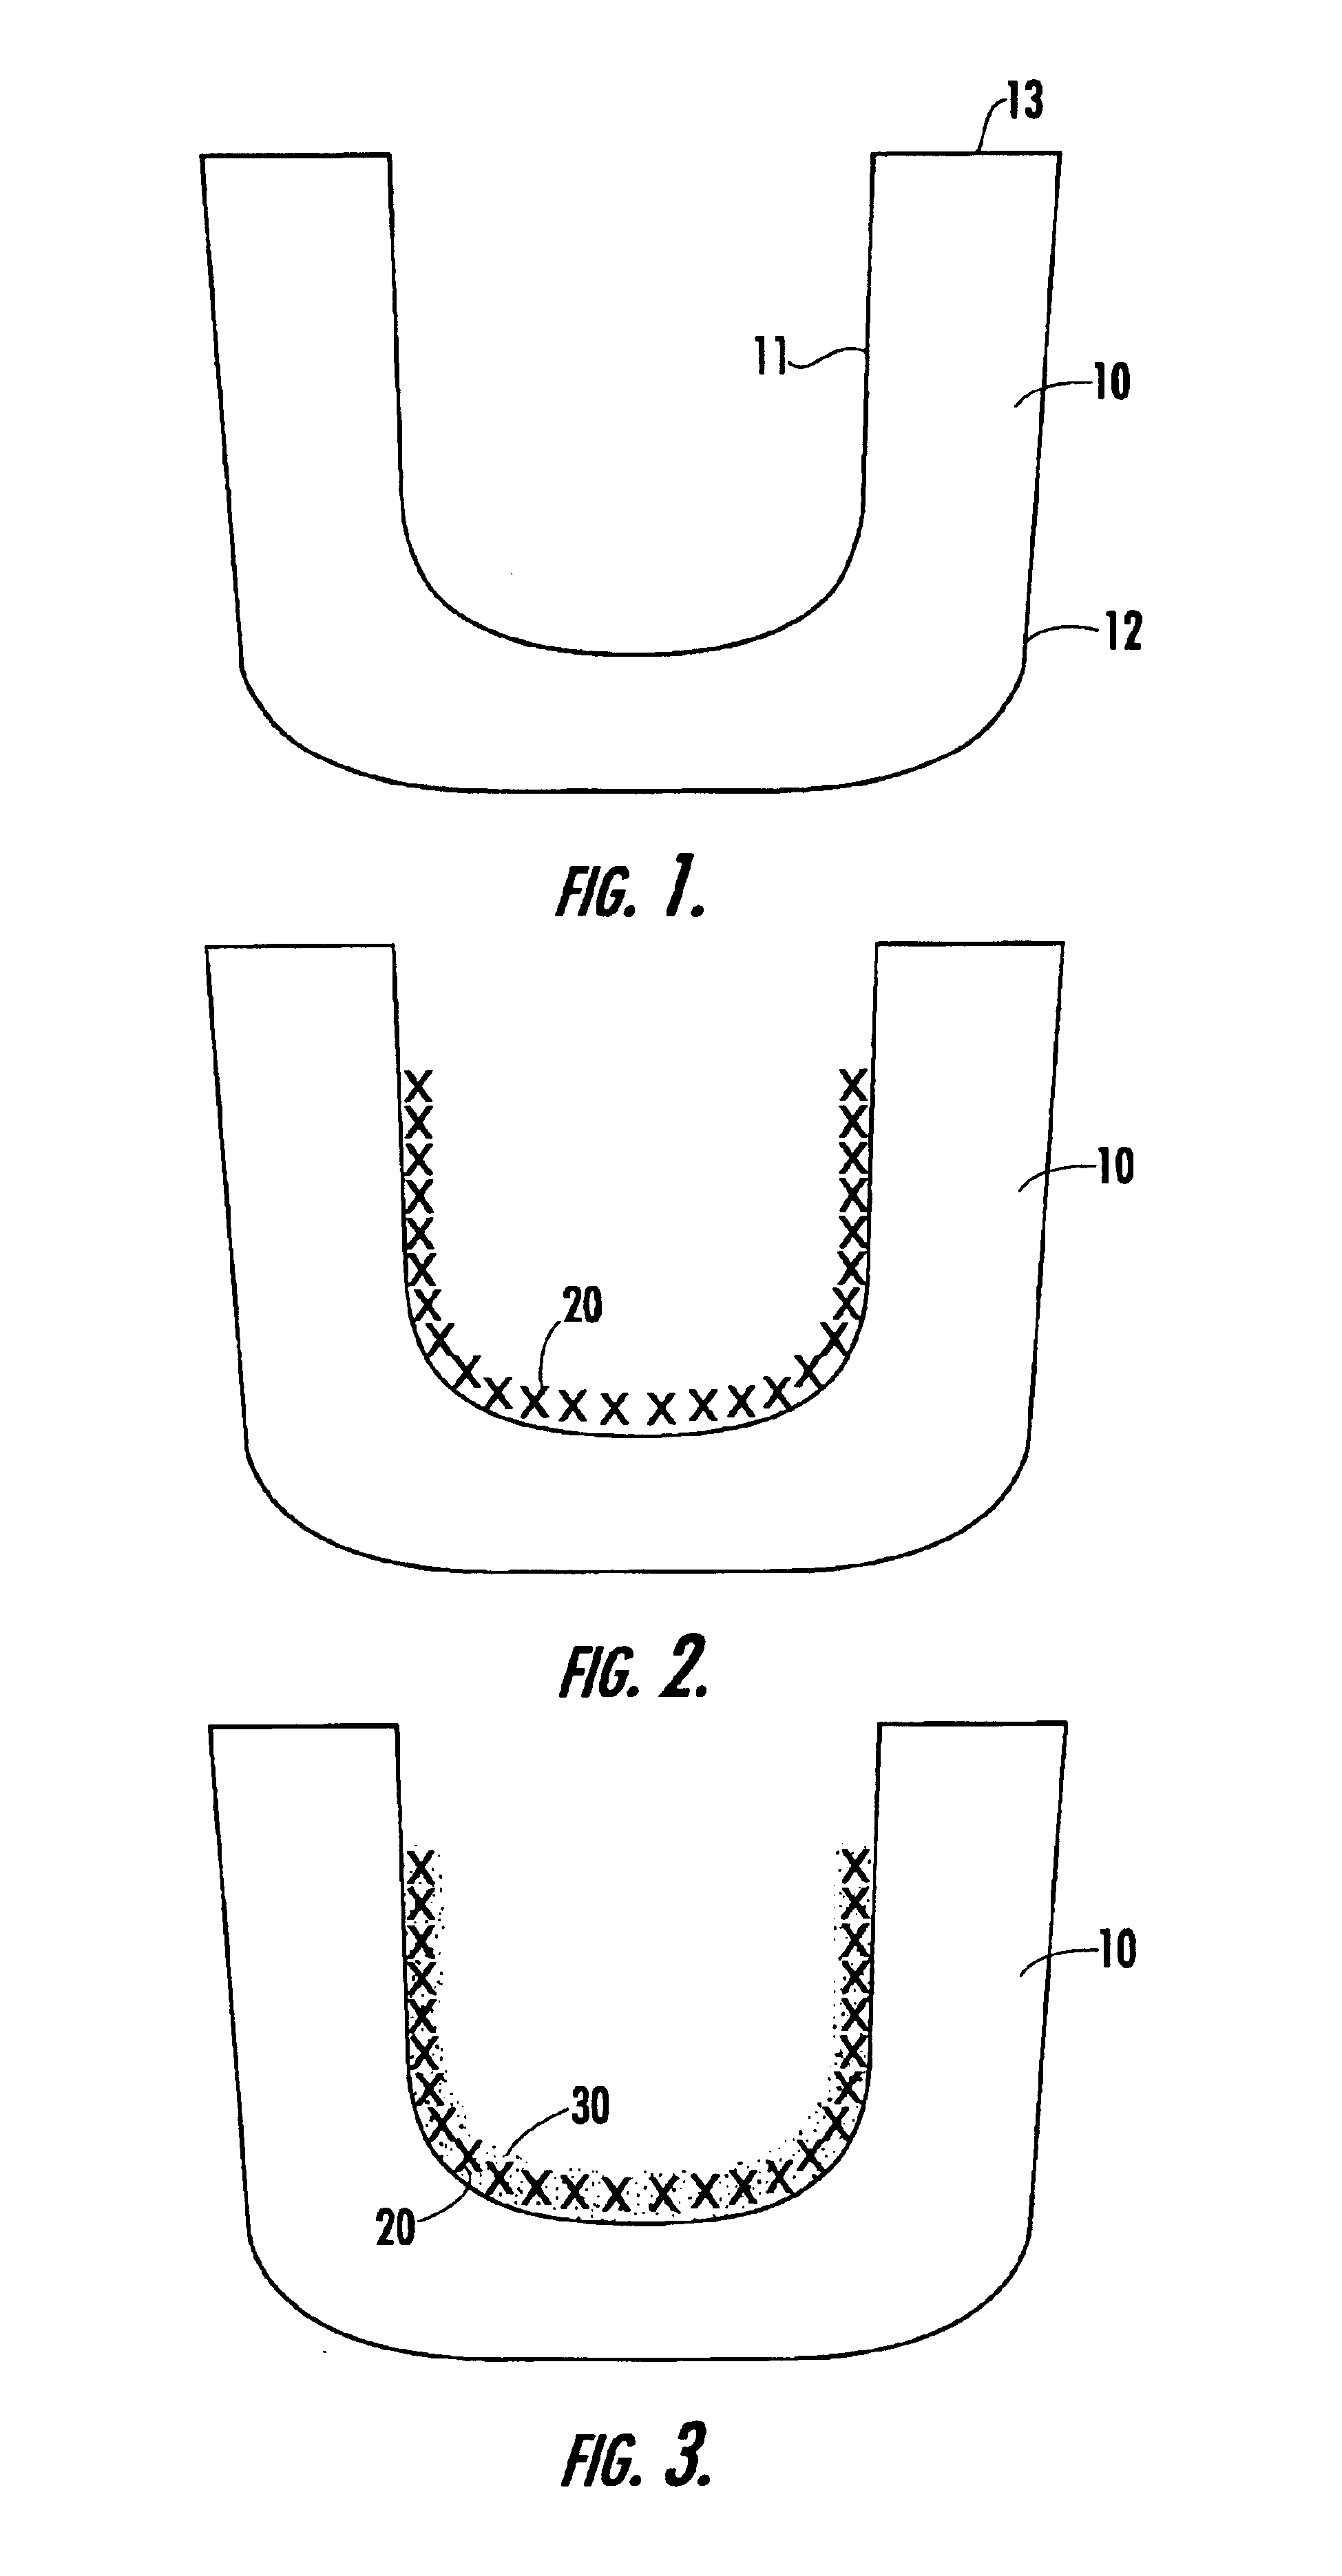 Mandrel-assisted resin transfer molding process employing resin outflow perimeter channel between male and female mold elements